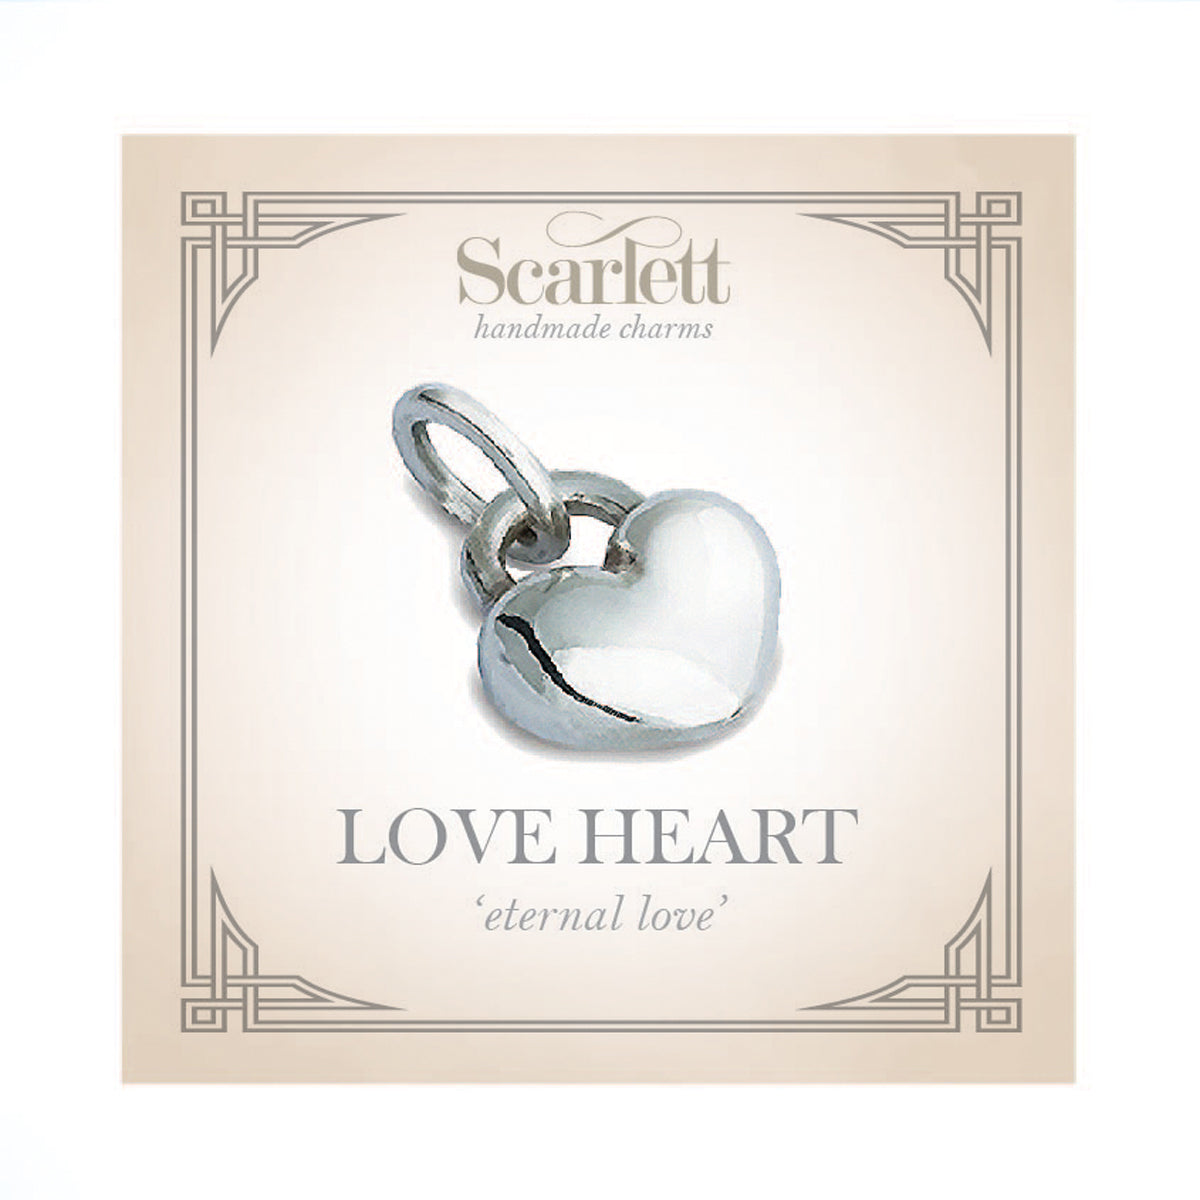 18ct Gold Small Heart Charm